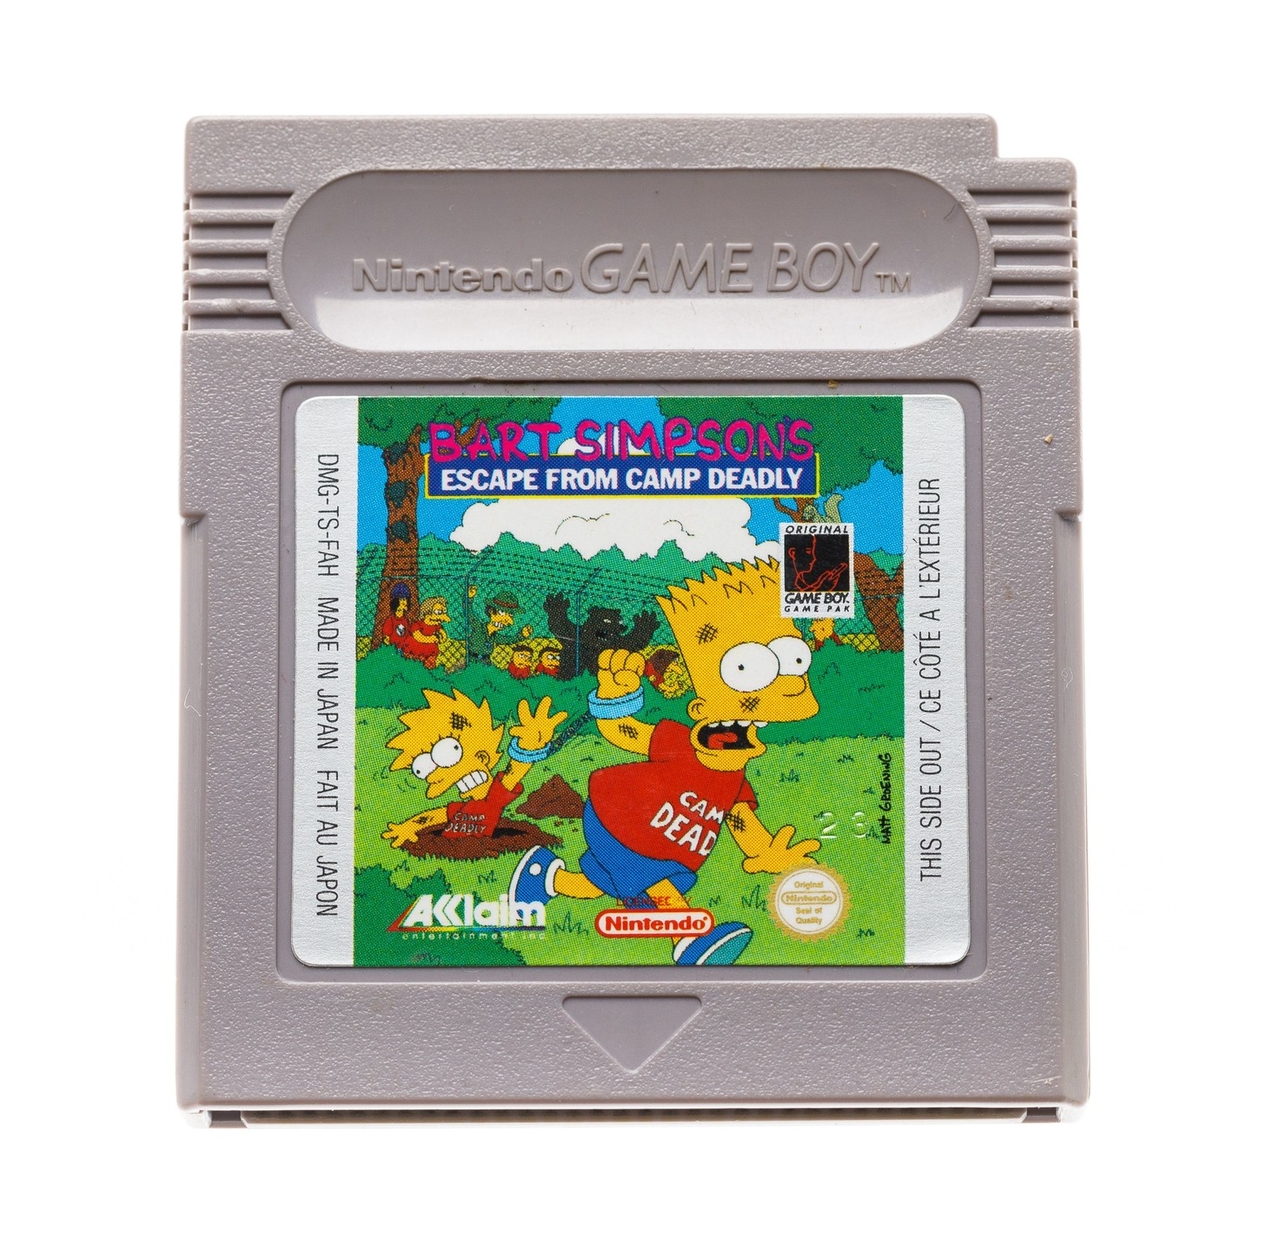 Bart Simpson's Escape from Camp Deadly | Gameboy Classic Games | RetroNintendoKopen.nl